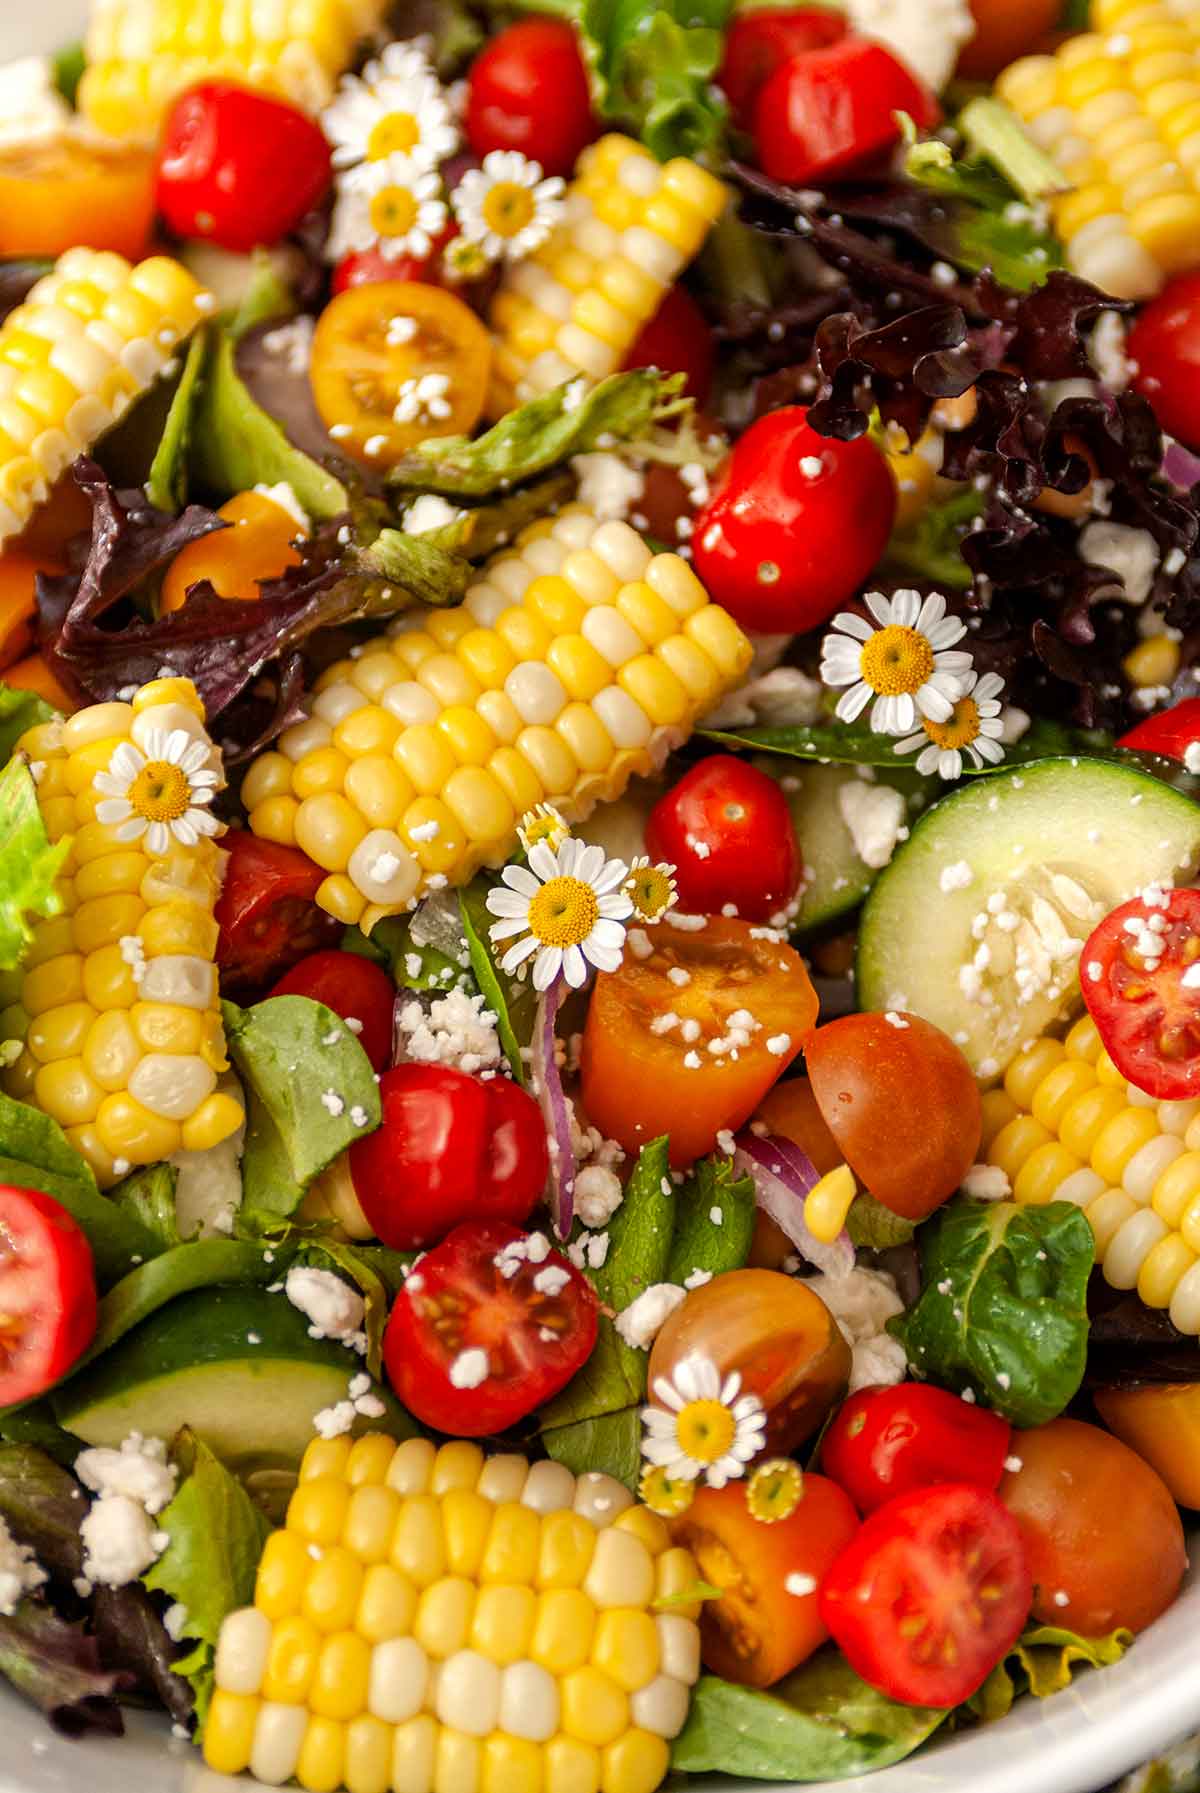 The corn and flowers in a summer salad.